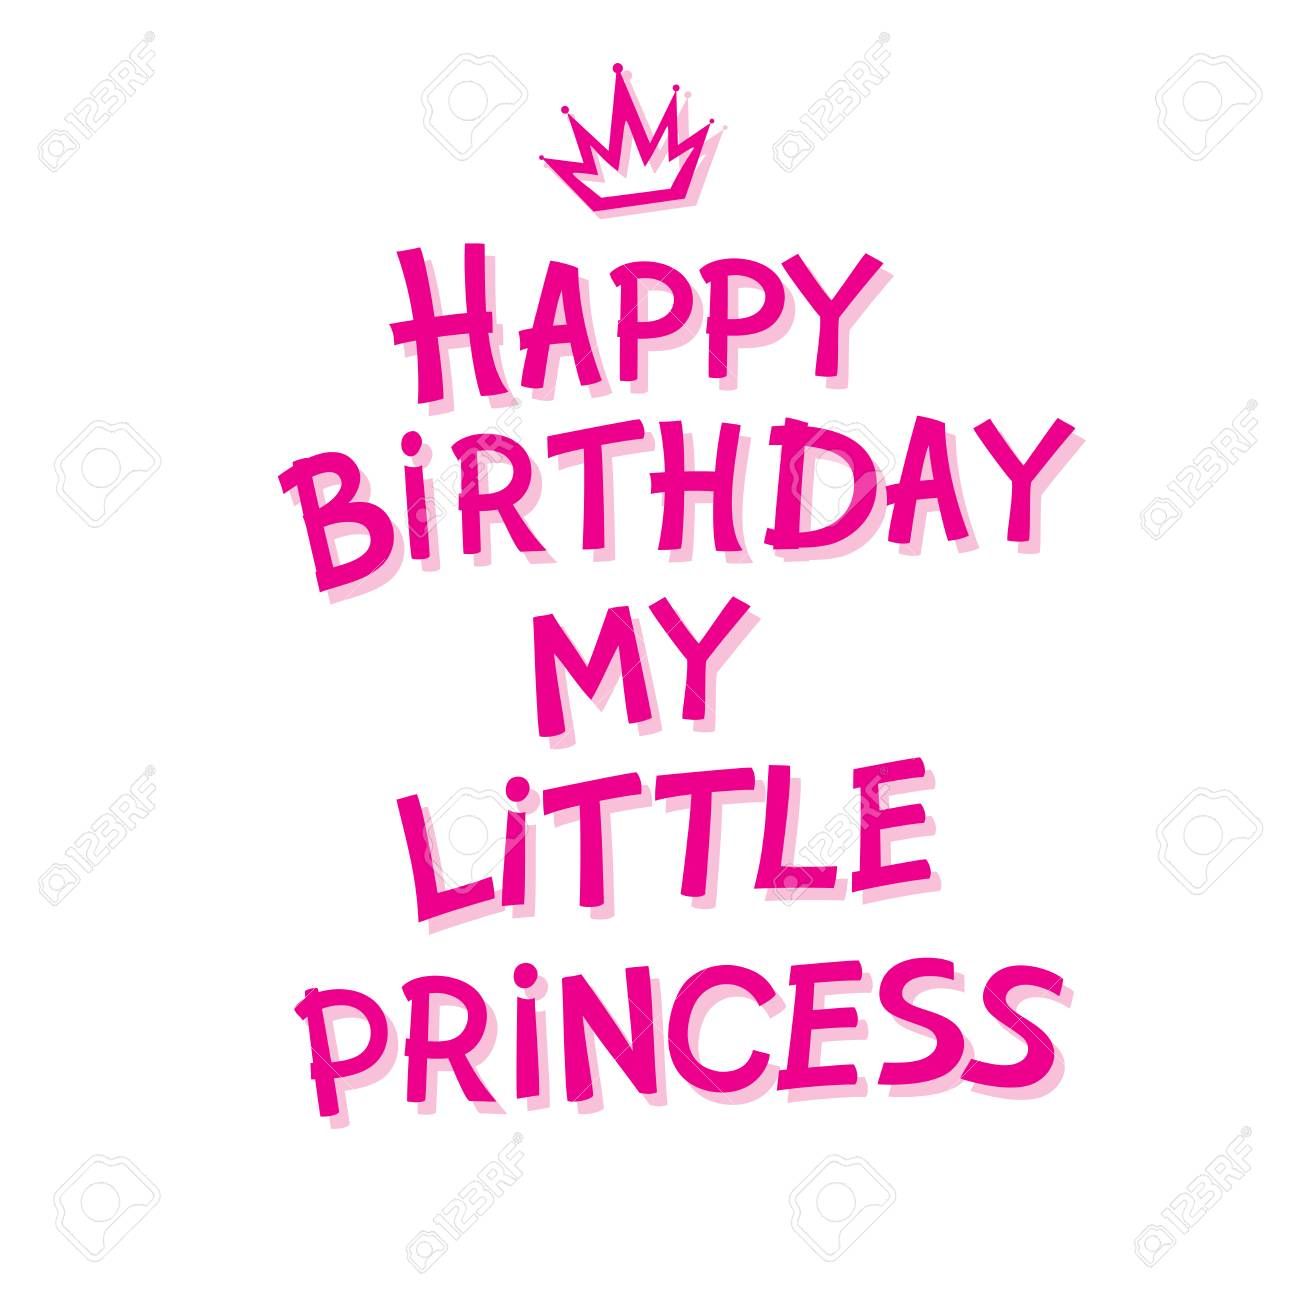 Happy Birthday my little princess. Hand lettering Happy Birthday for